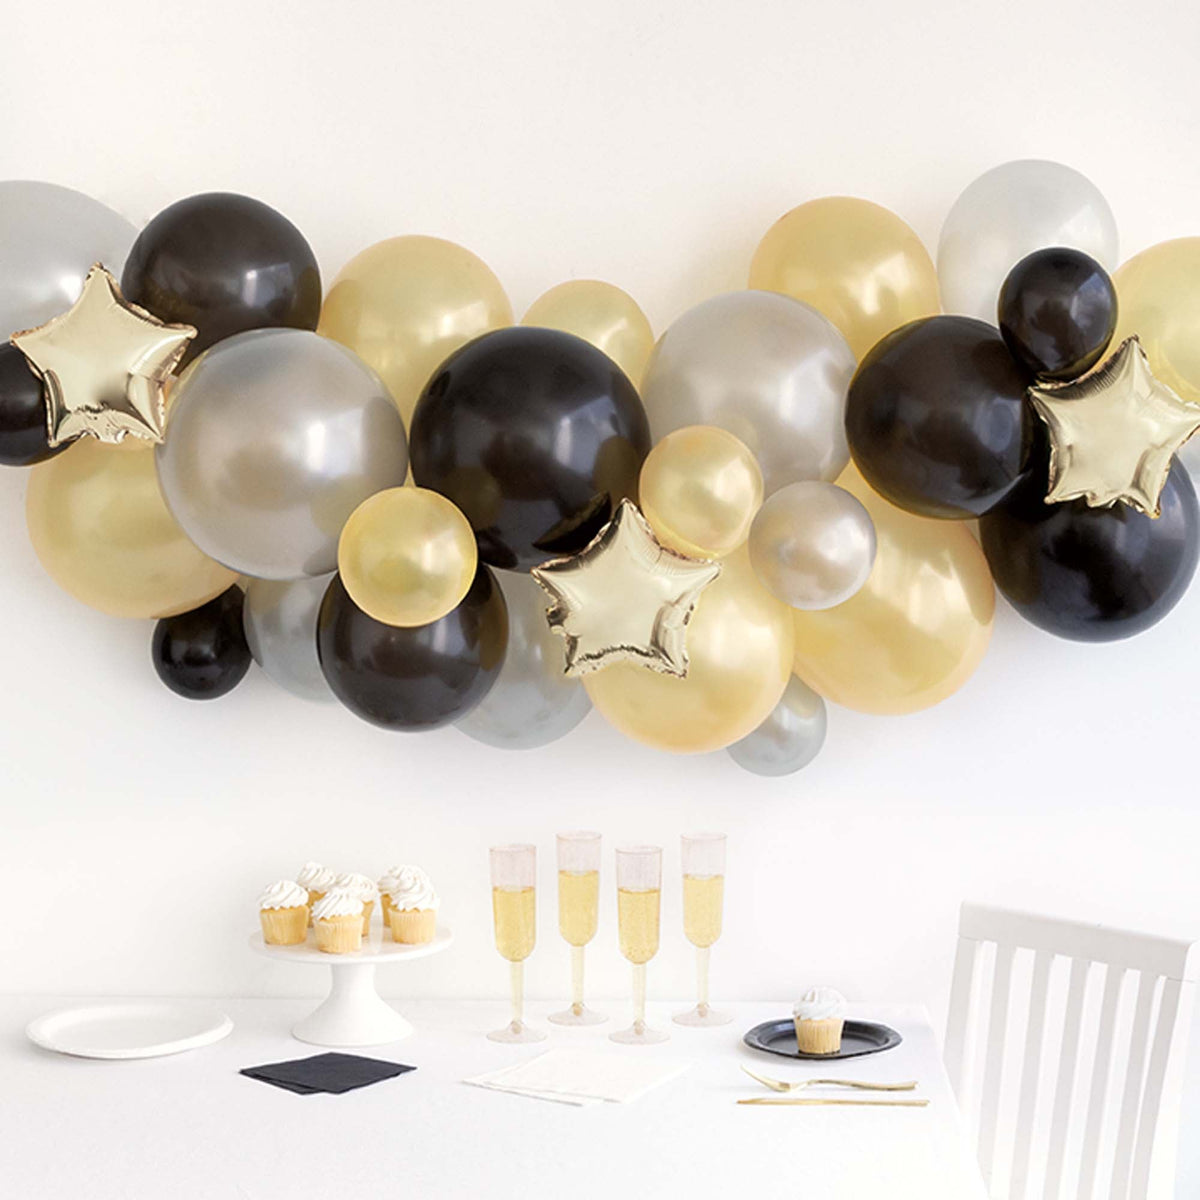 UNIQUE PARTY FAVORS New Year Disco New Year's Balloon Garland Kit, 1 Count